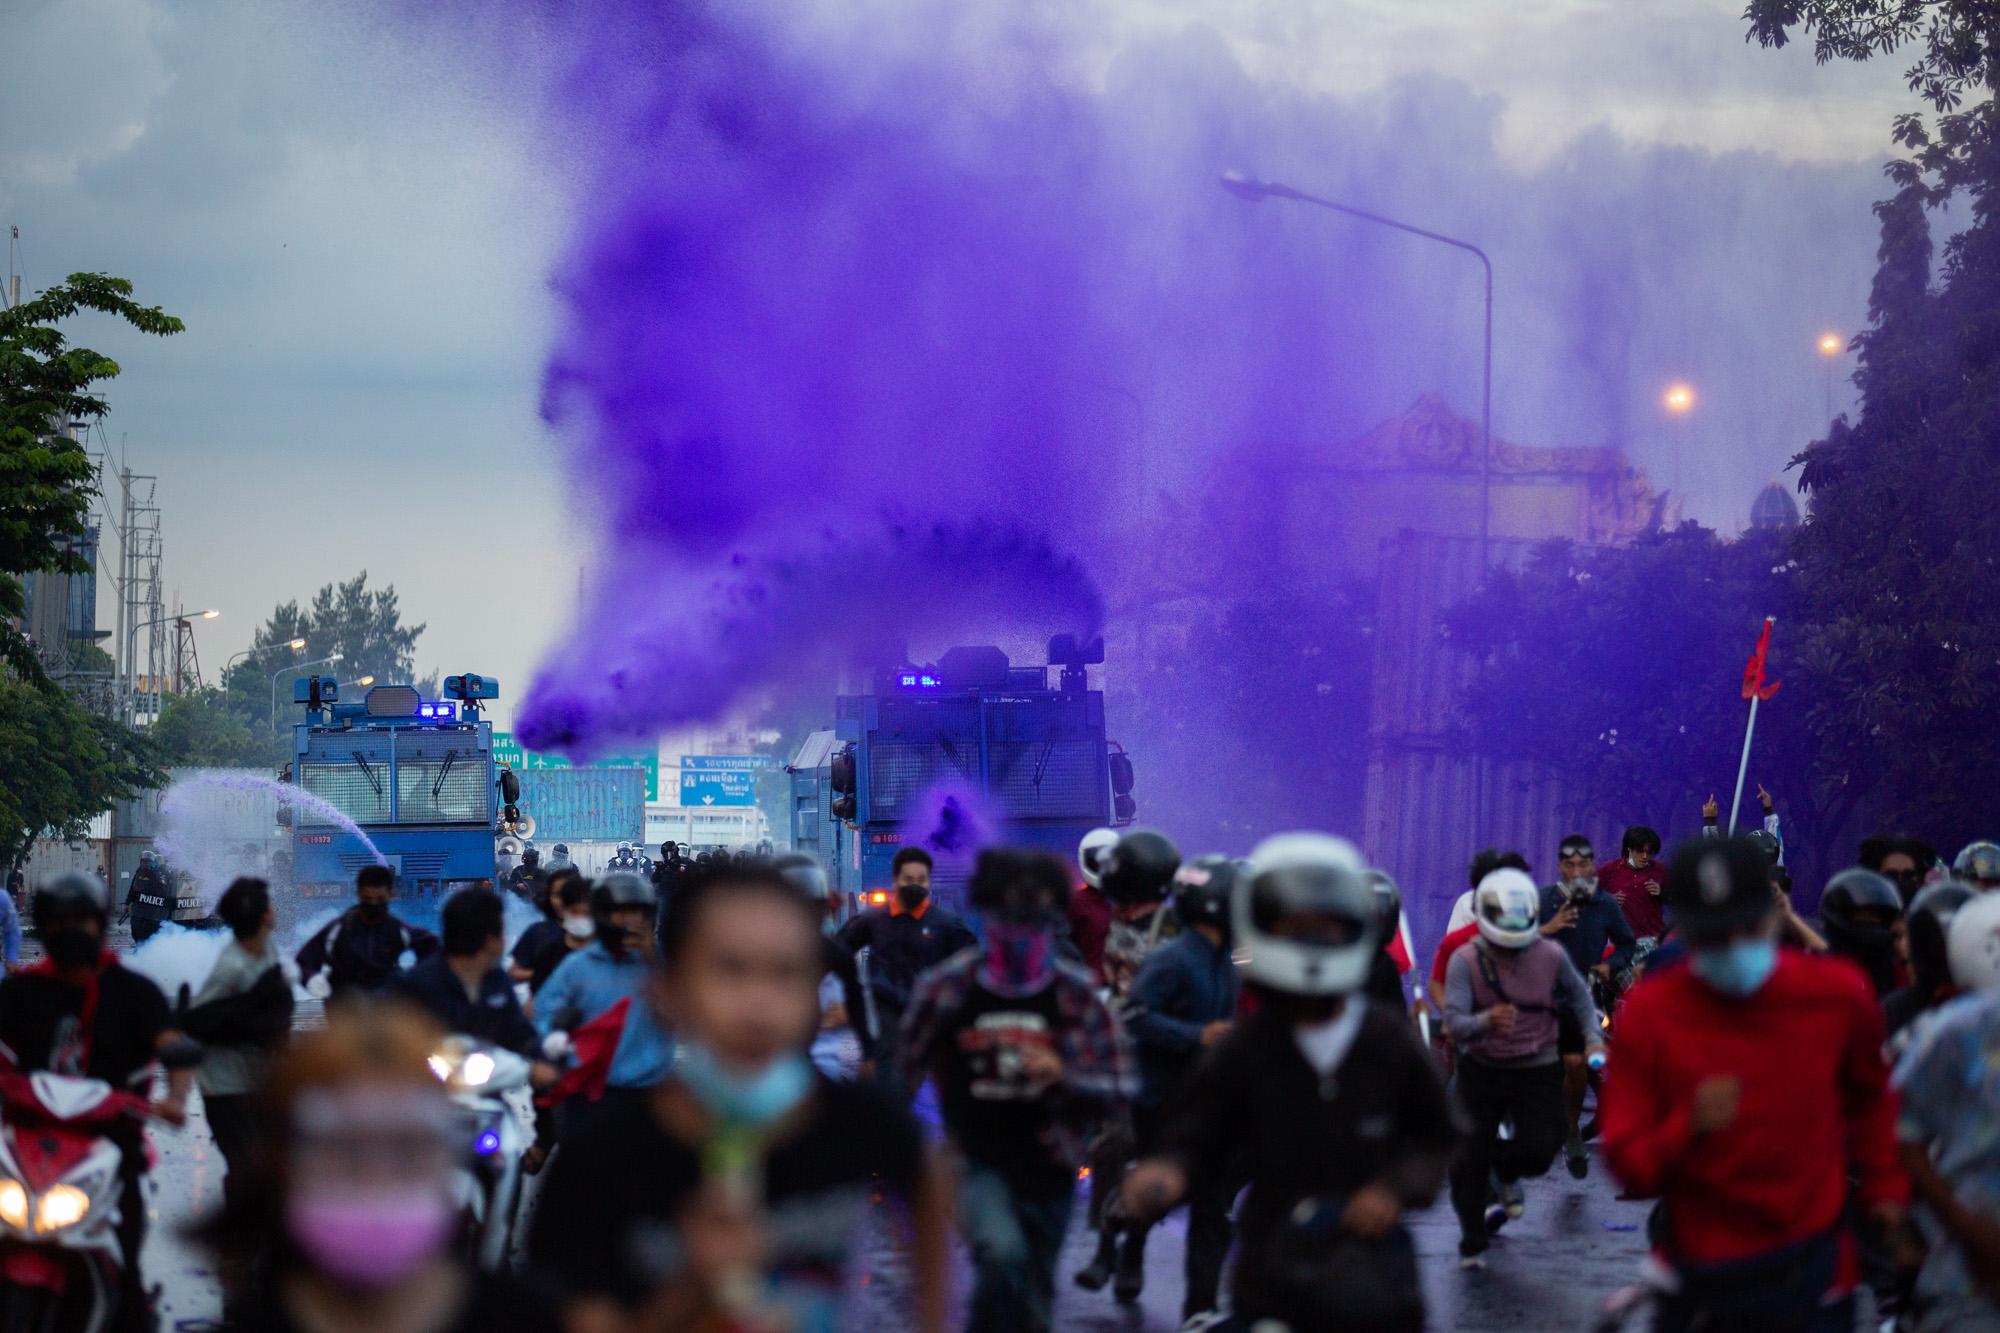 Pro-democracy protestors flee from chemical water cannon&#39;s during clashes with riot police at Din Daeng intersection in Bangkok, Thailand, August 2021. Riot police switched to the strong chemical water seen here, after protestors began to counter tear gas with gas masks and tear gas canister neutralization methods, defense against water cannons is limited to running and hiding.